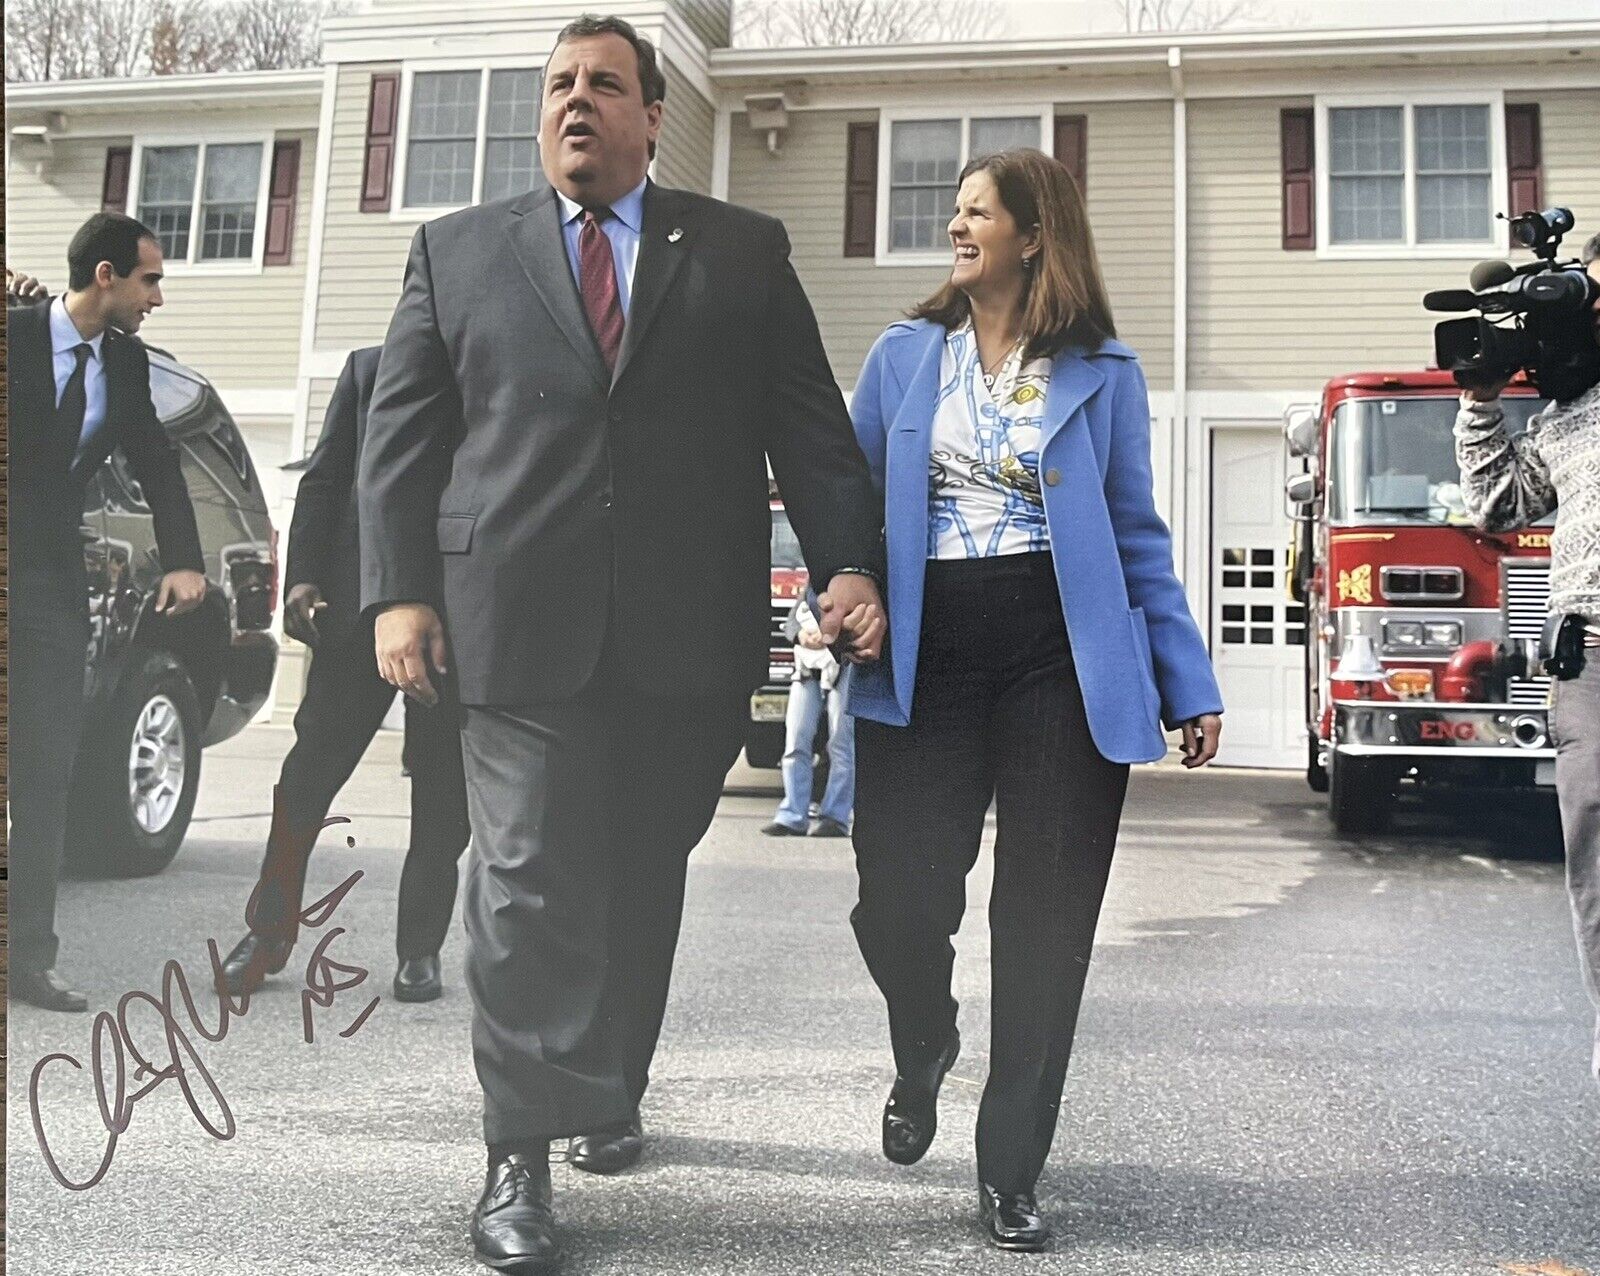 CHRIS CHRISTIE Signed Autograph 8x10 Photo Governor 2024 President? Mary Pat